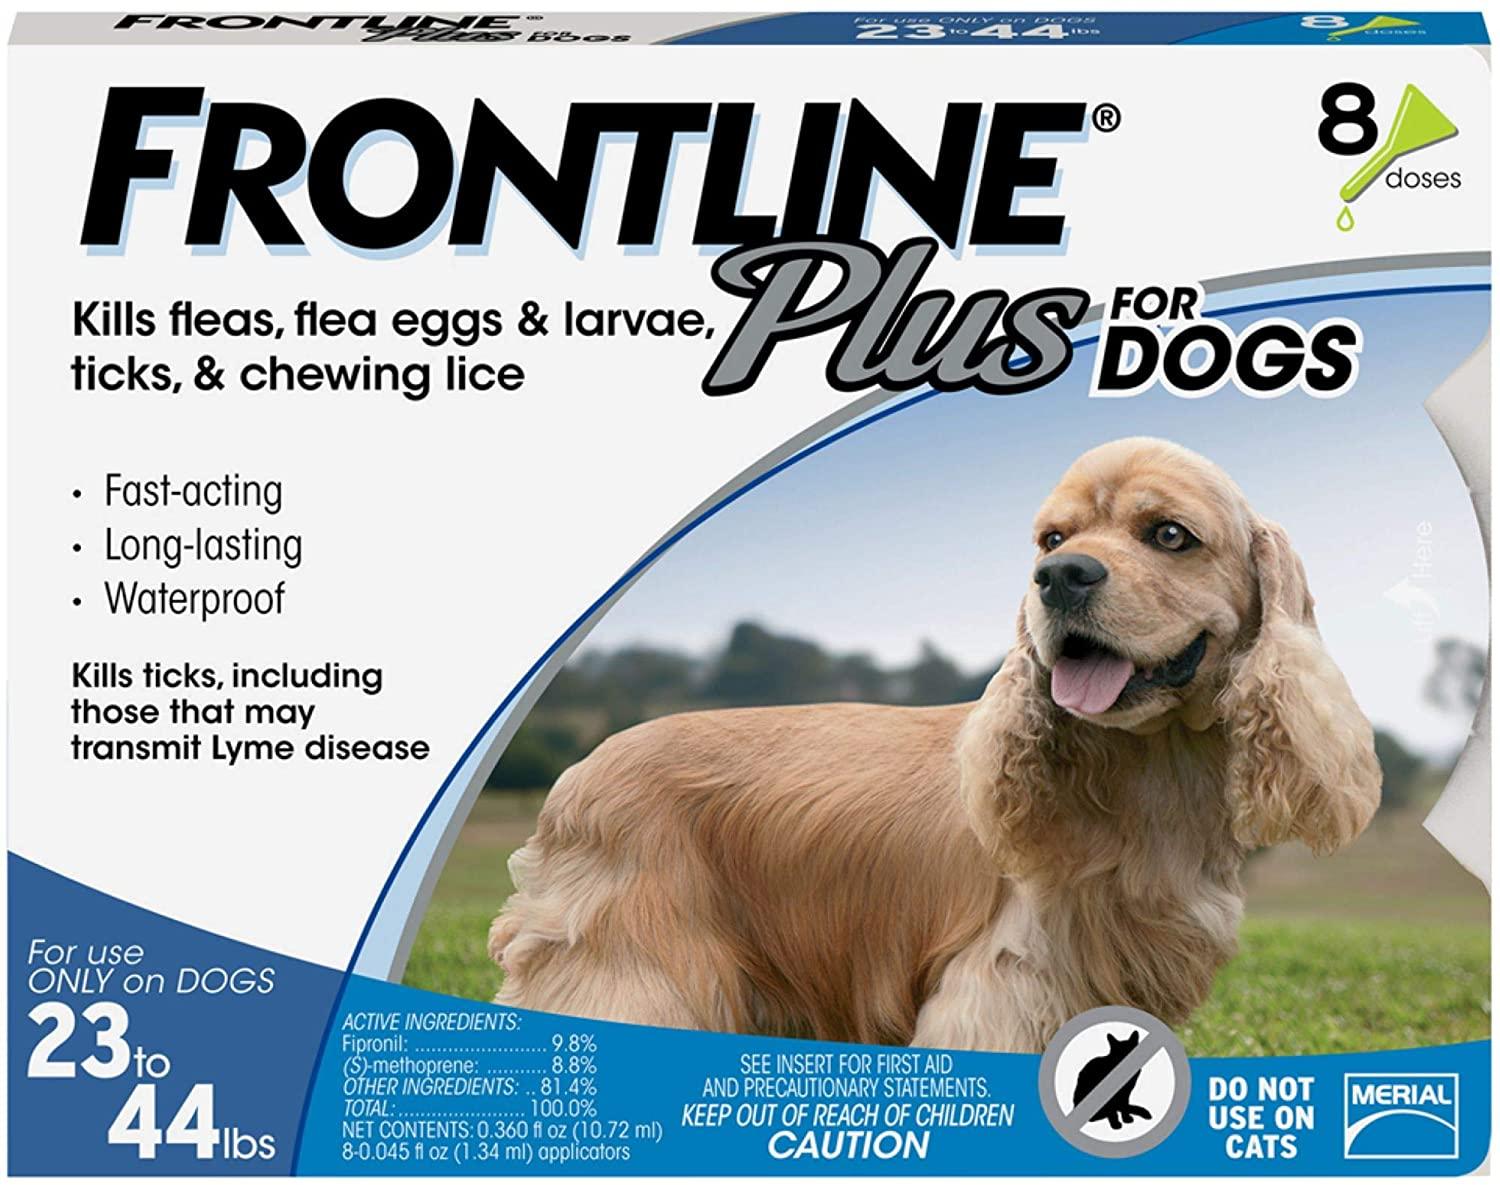 Frontline Plus 8-Dose Flea & Tick Treatment for Dogs for $46.42 Shipped